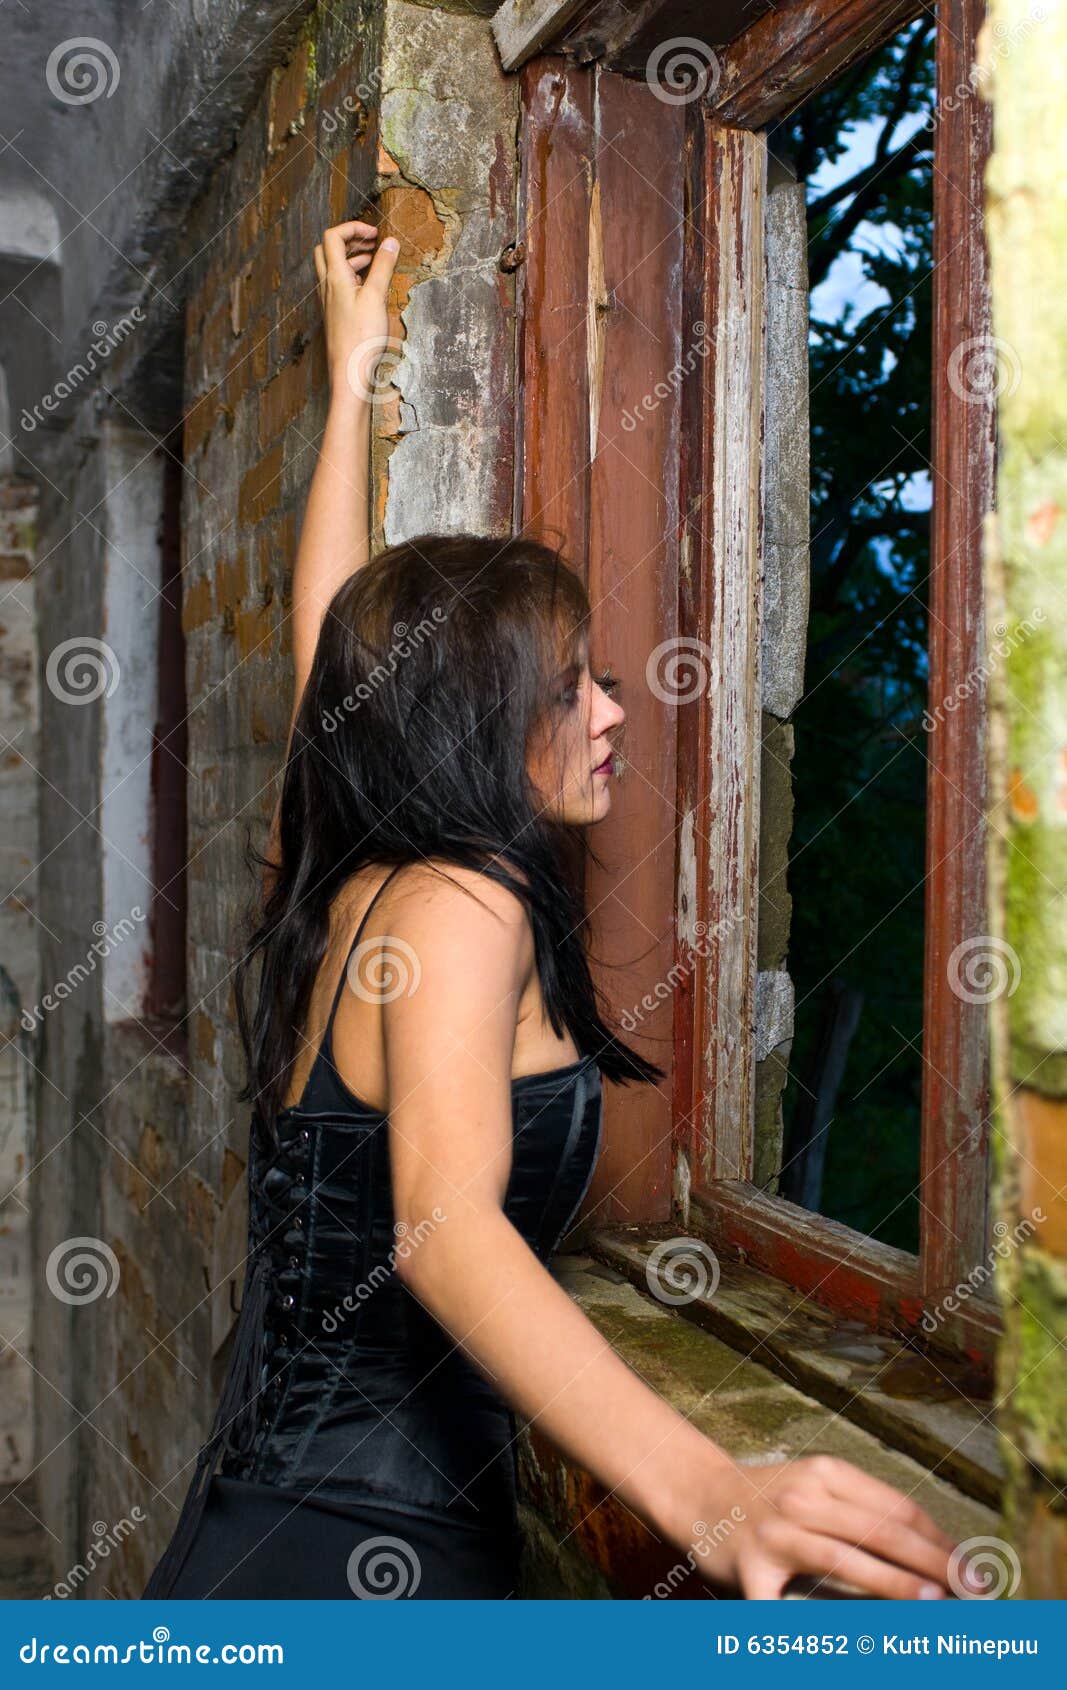 Goth Girl Looking Out Window Stock Photography - Image 